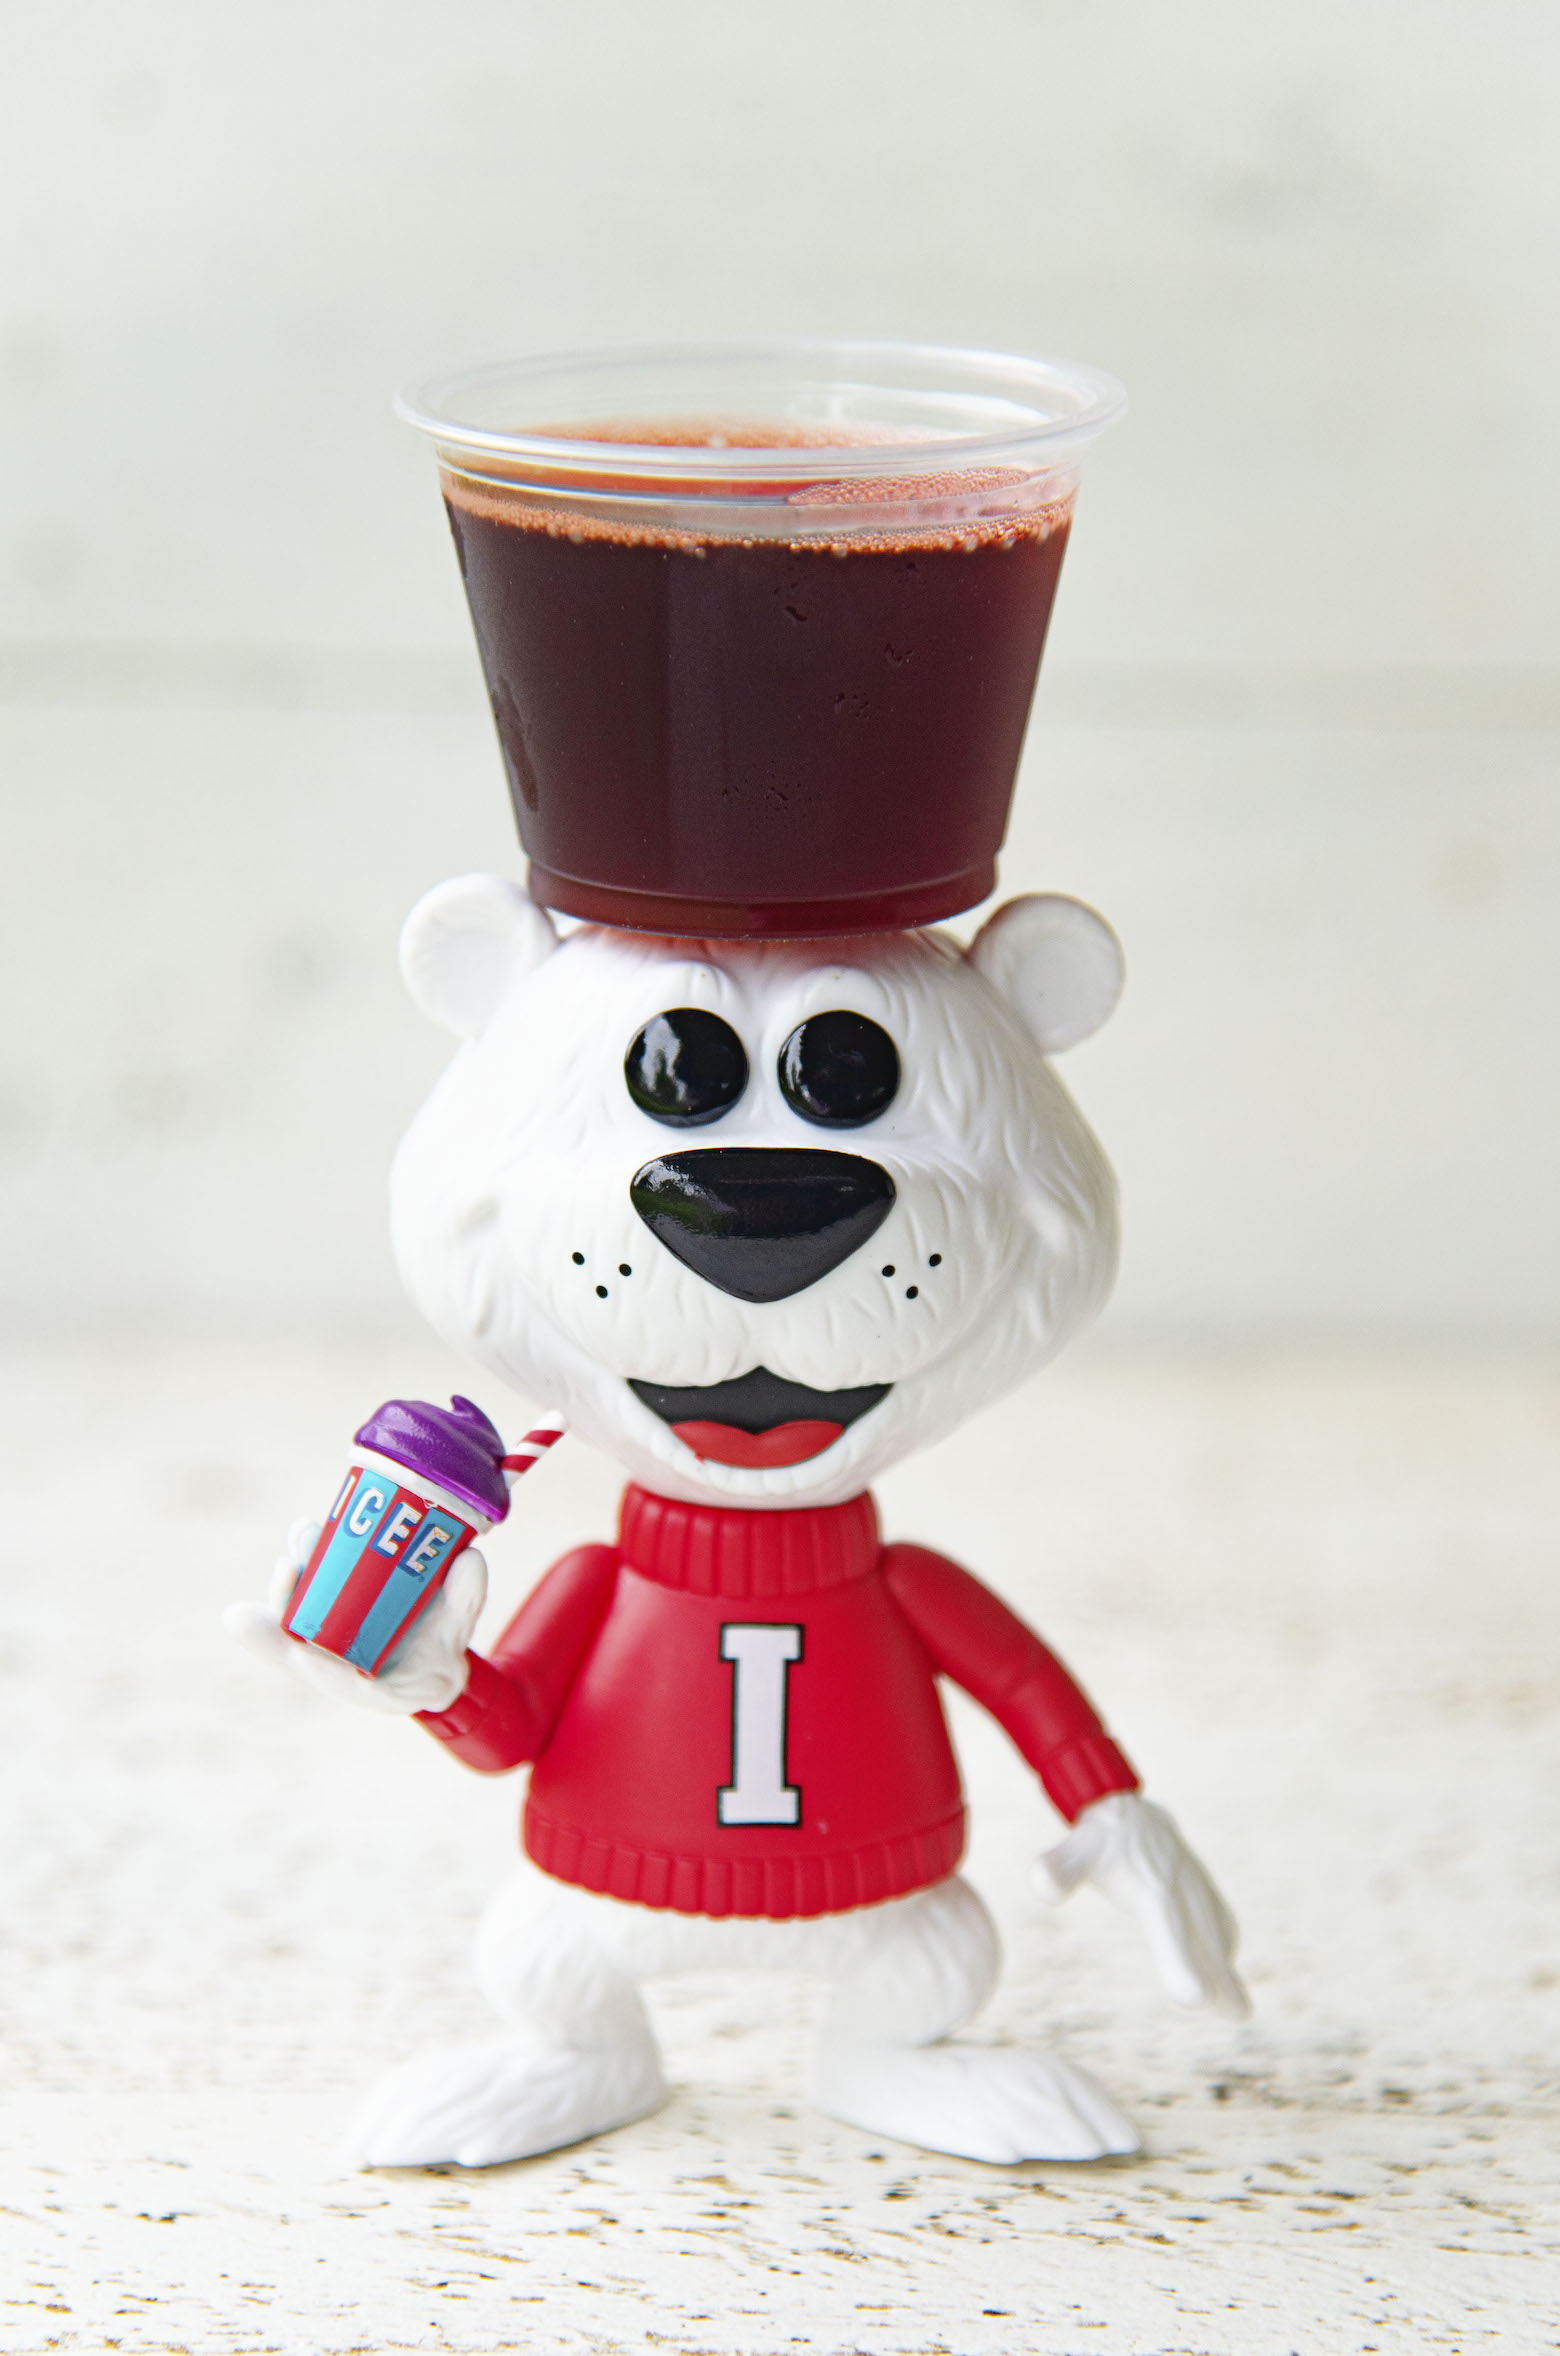 Shot of the Icee Bear with a jello shot on his head.